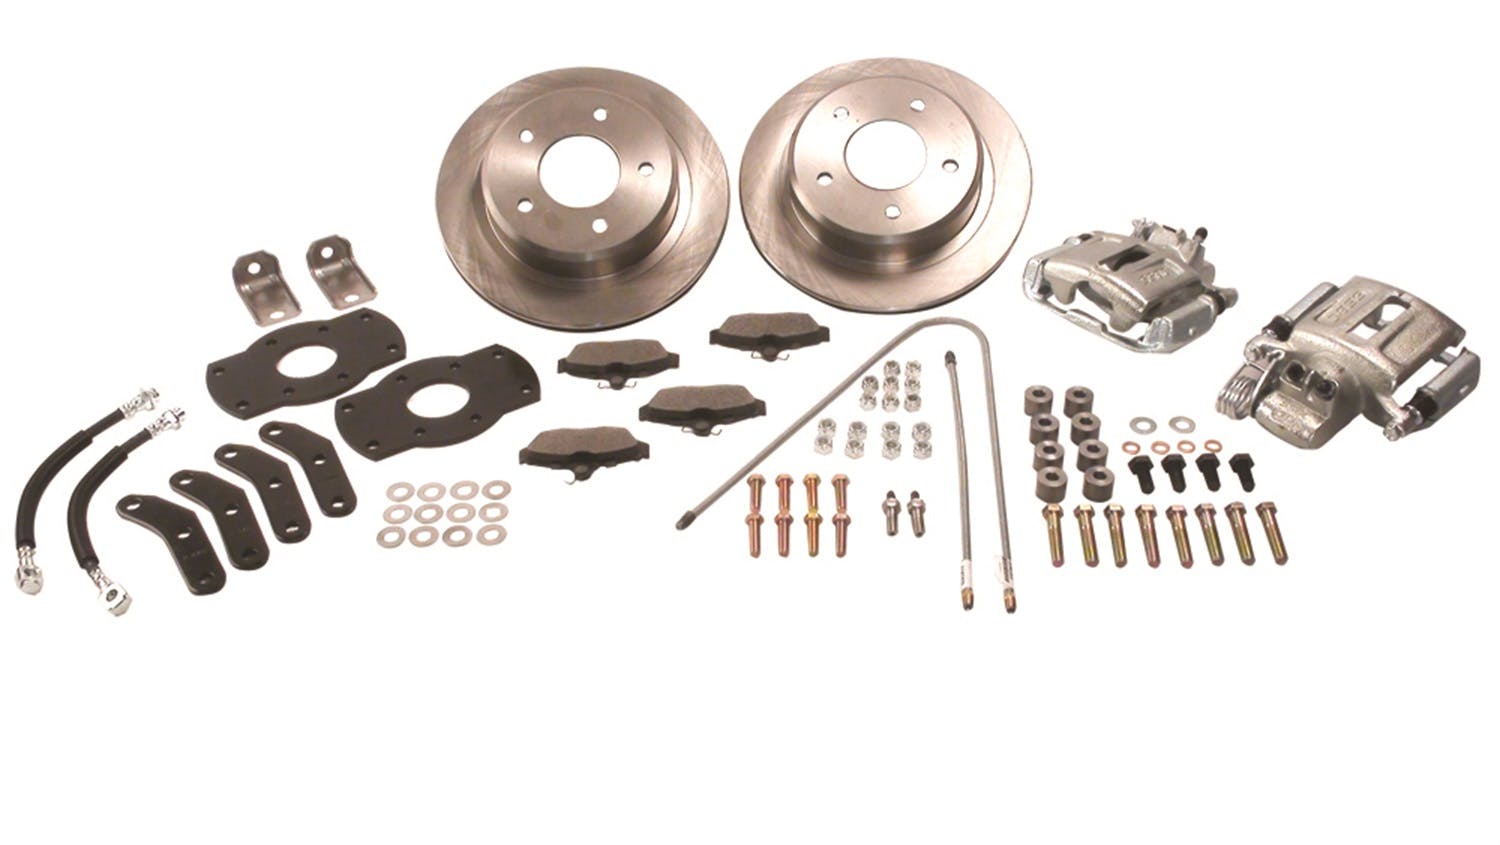 Stainless Steel Brakes A158BK Kit A158 w/black calipers